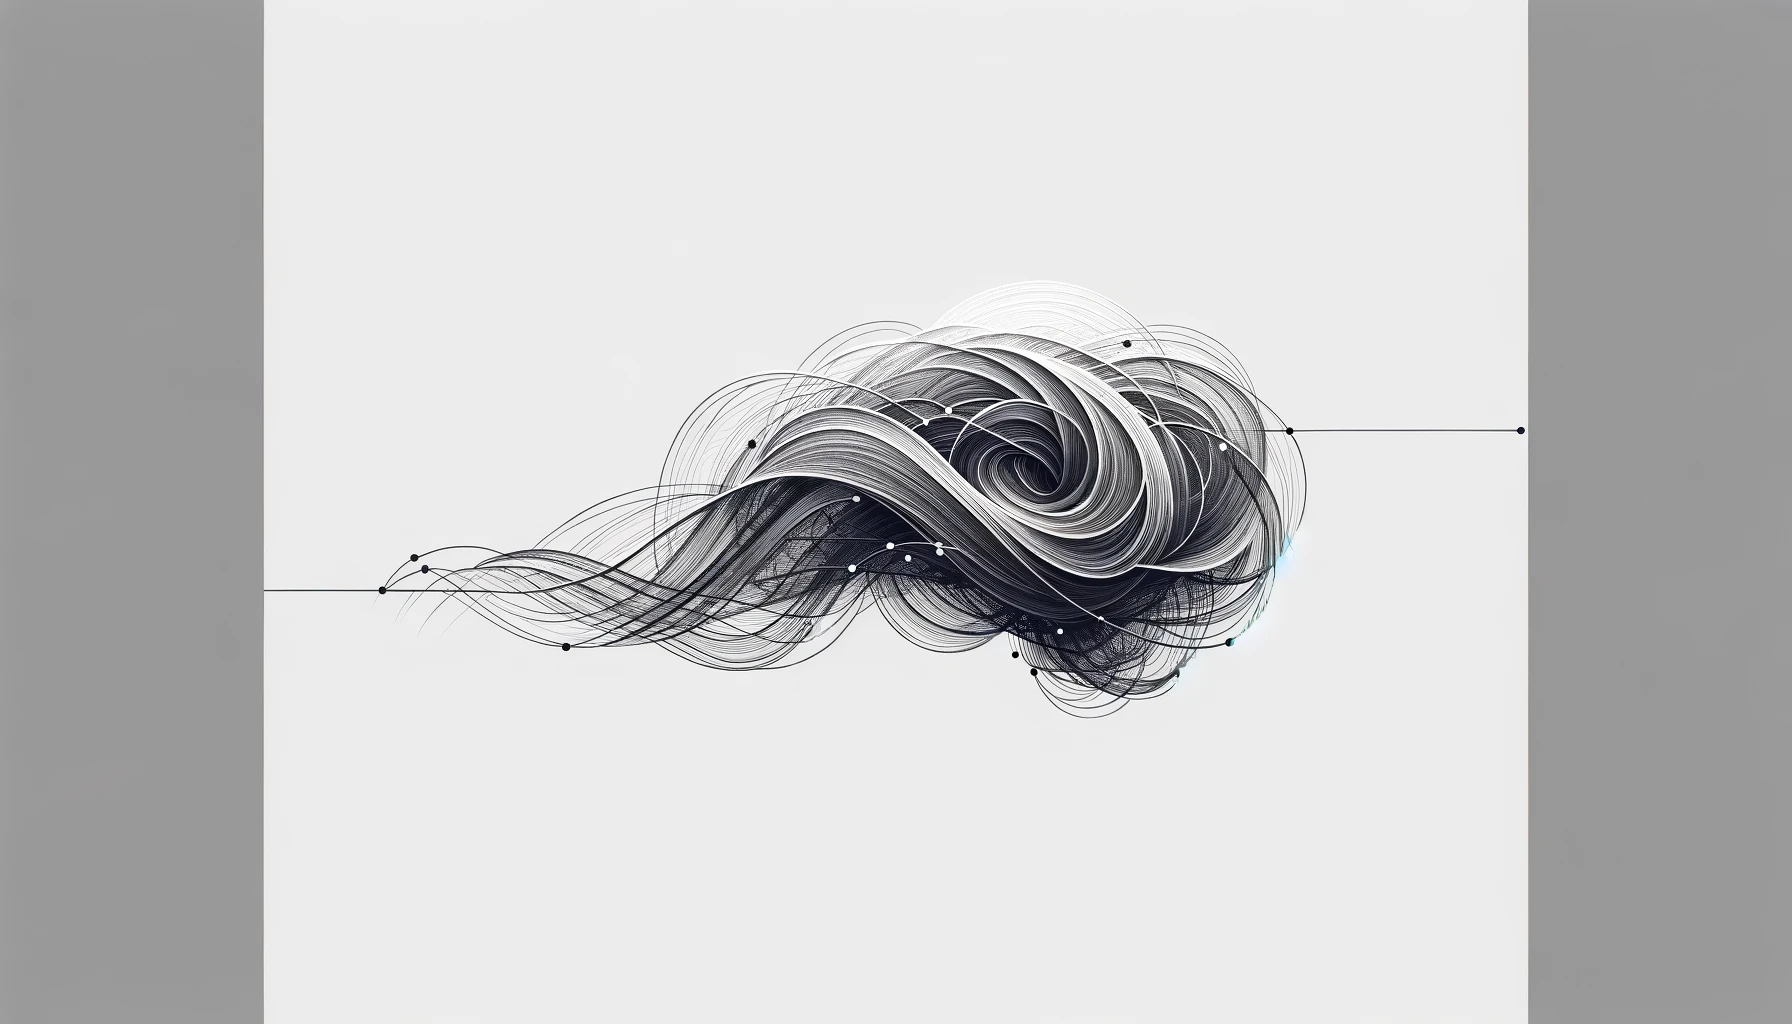 Abstract black and white image of swirling lines creating a circular, wave-like pattern on a grey background.